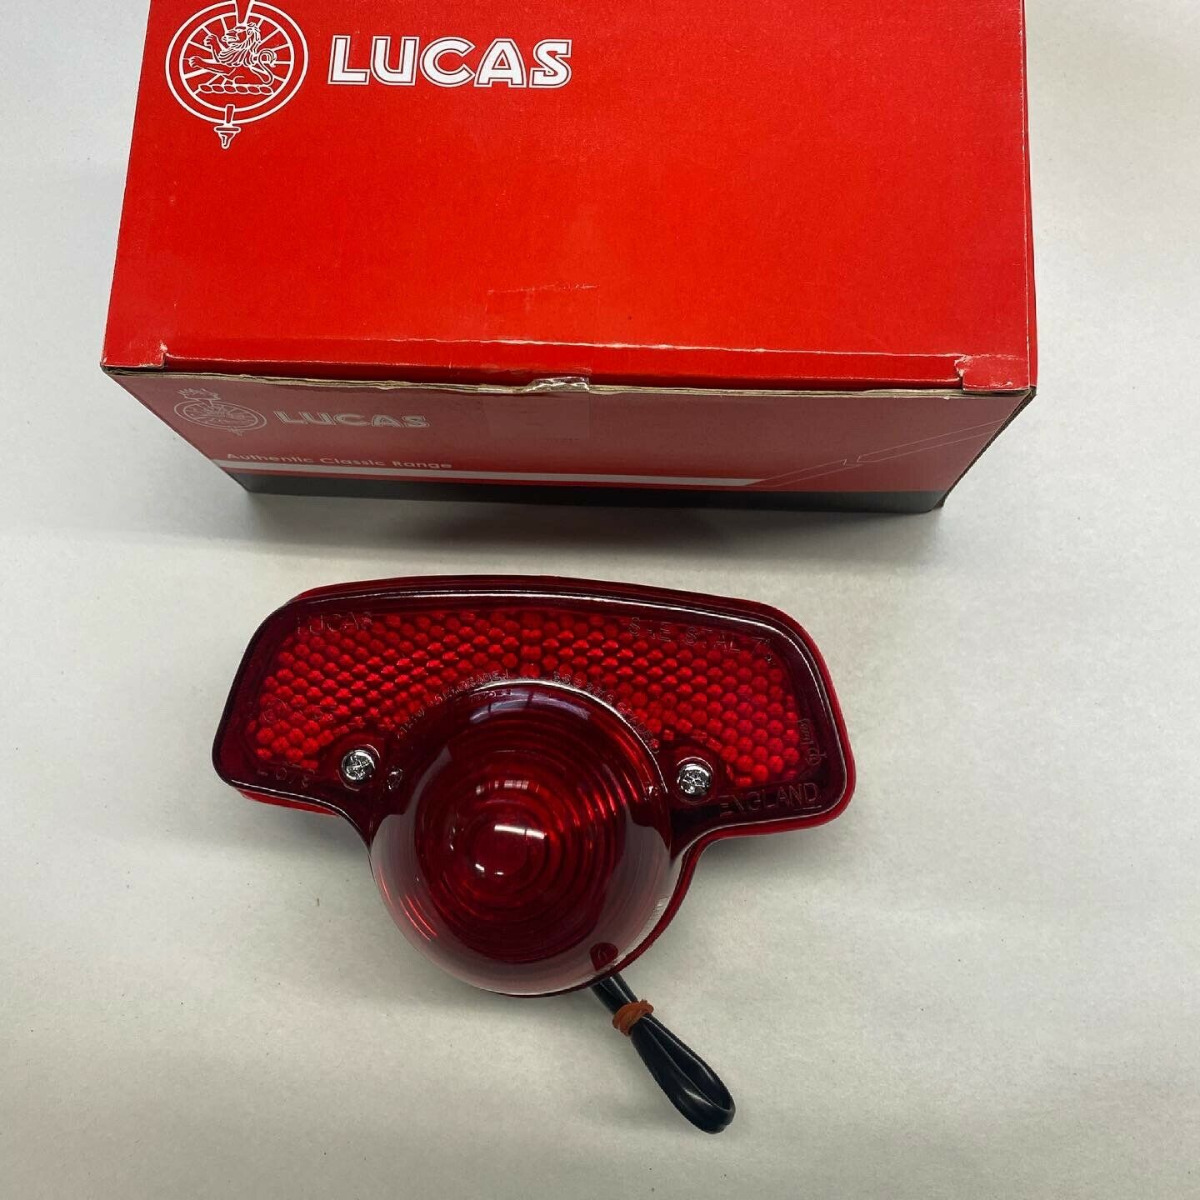 TRIUMPH LUCAS TAILLIGHT FIXTURE 1966-1972 500-650 T100 T120 TR6 MADE IN UK